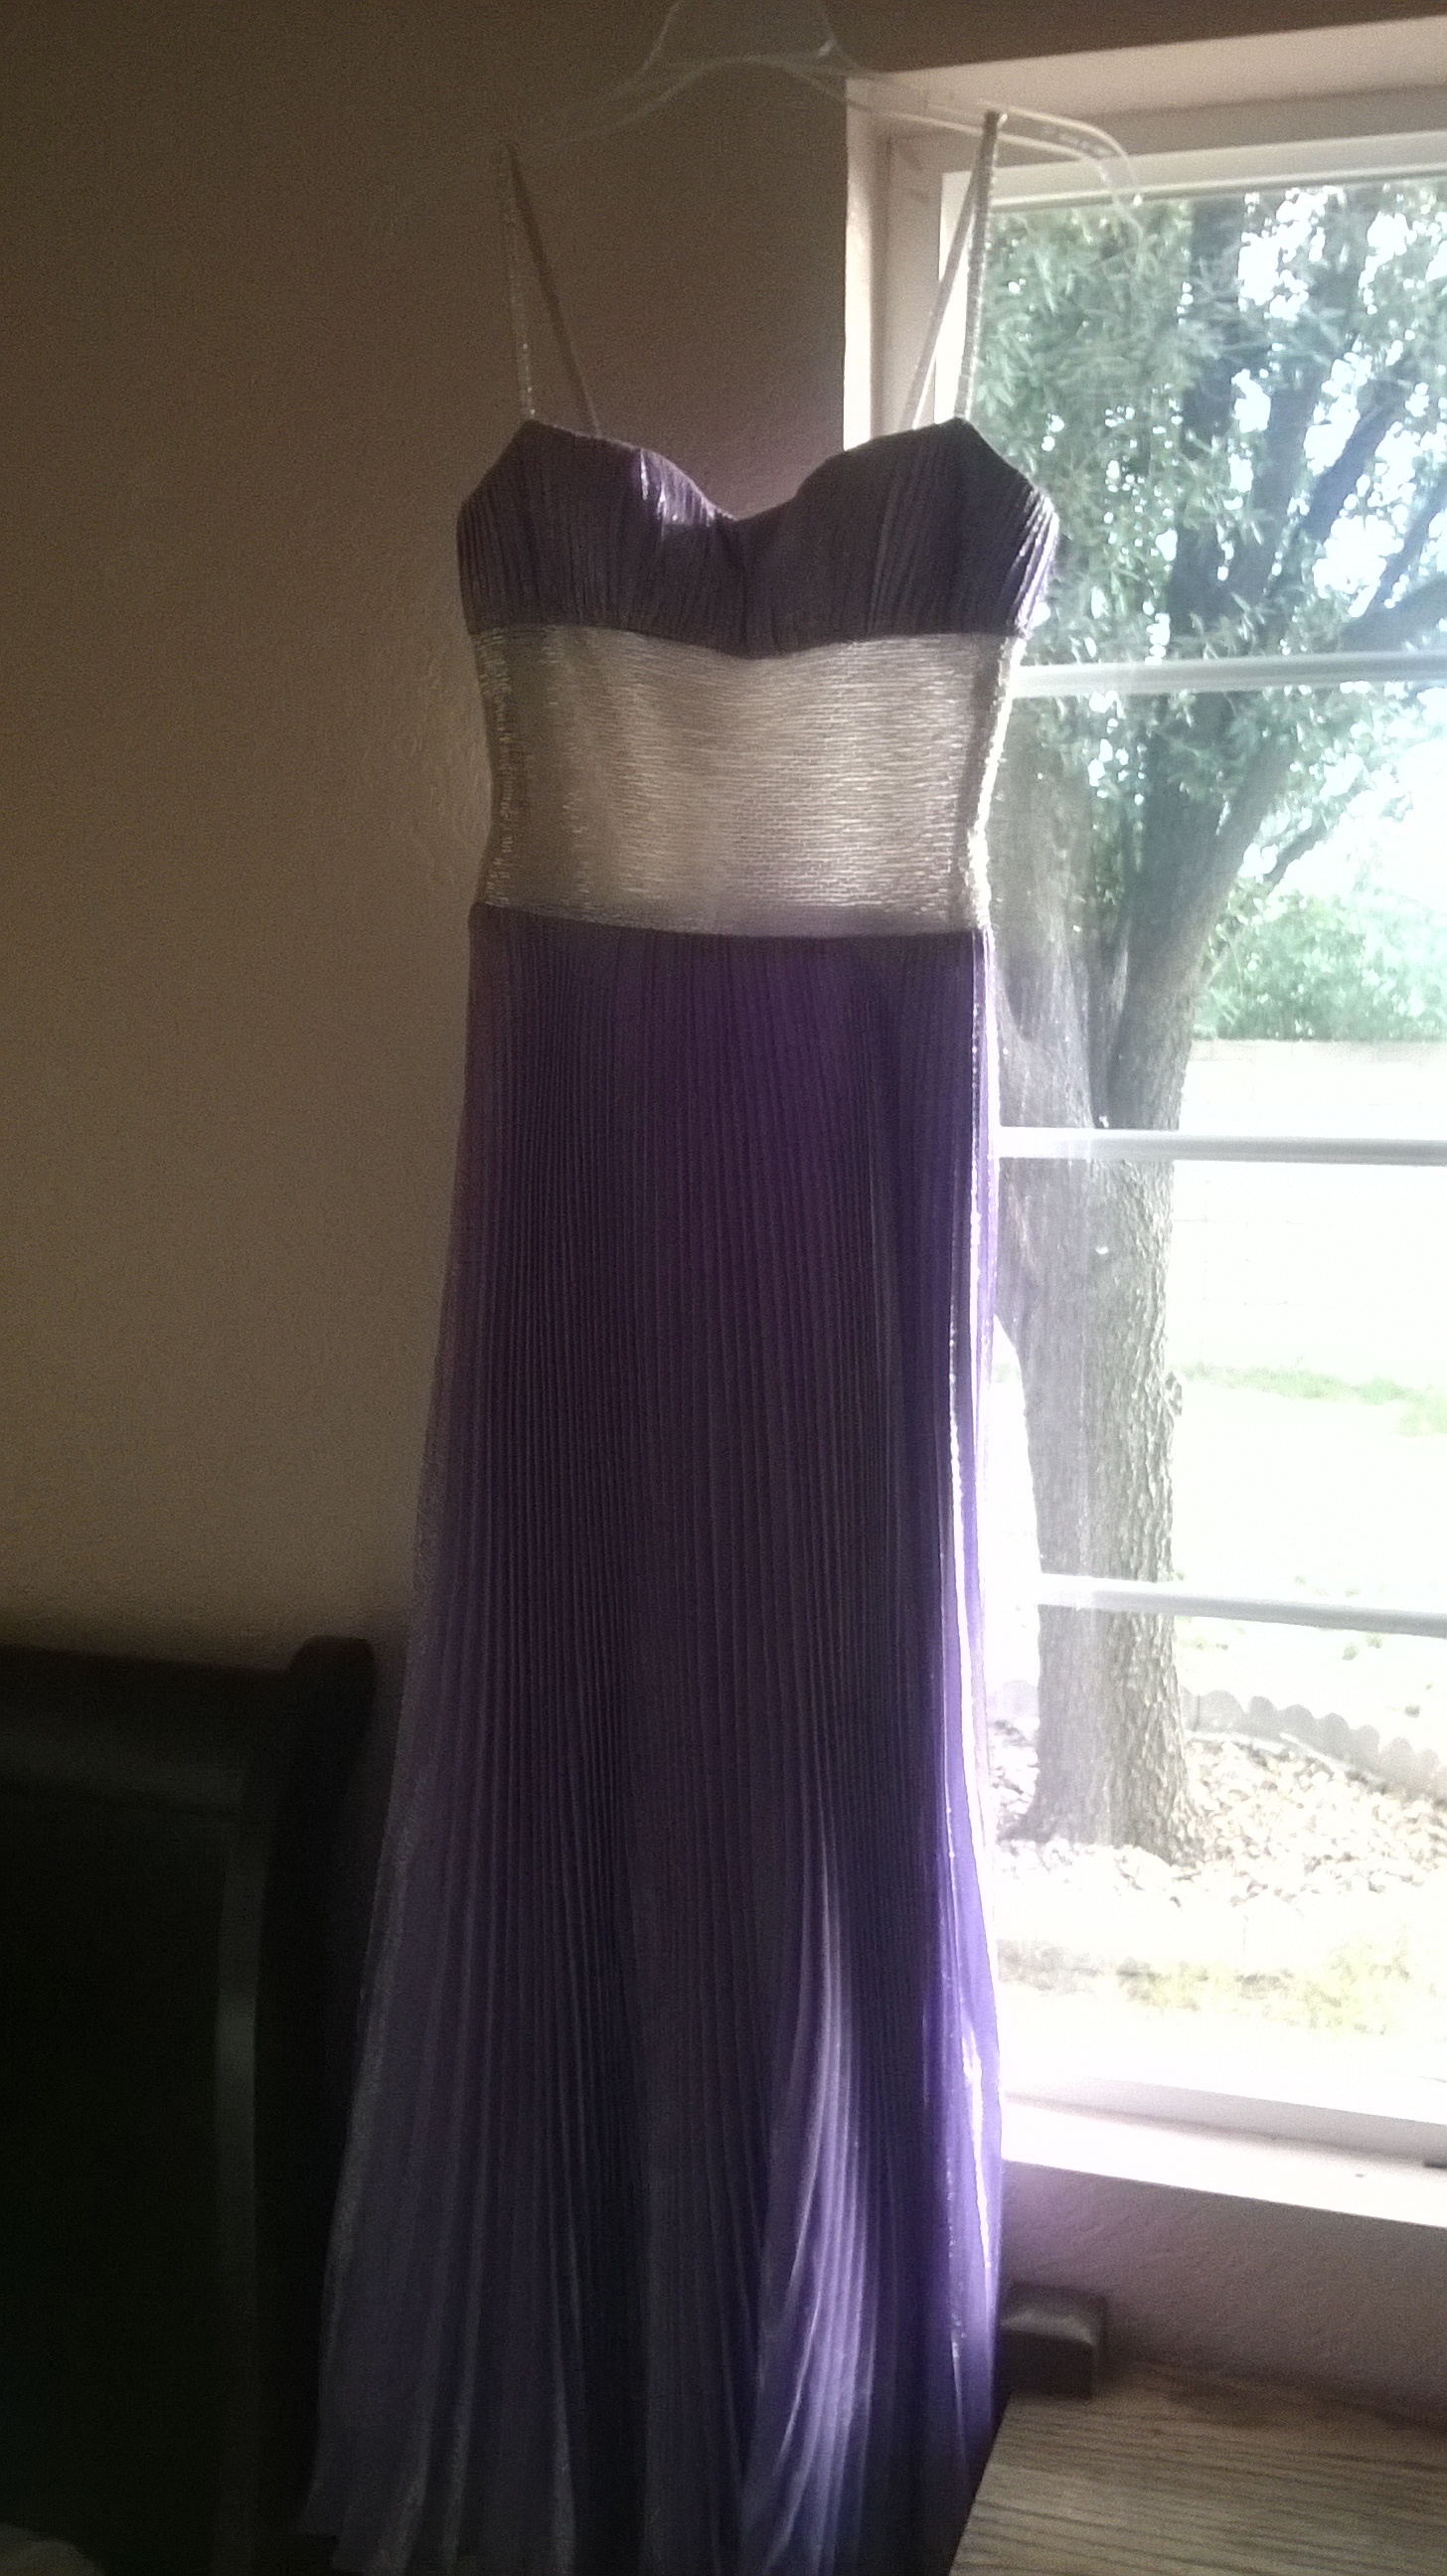 Purple and Silver Pagent/Prom dress-Size 0 Petite